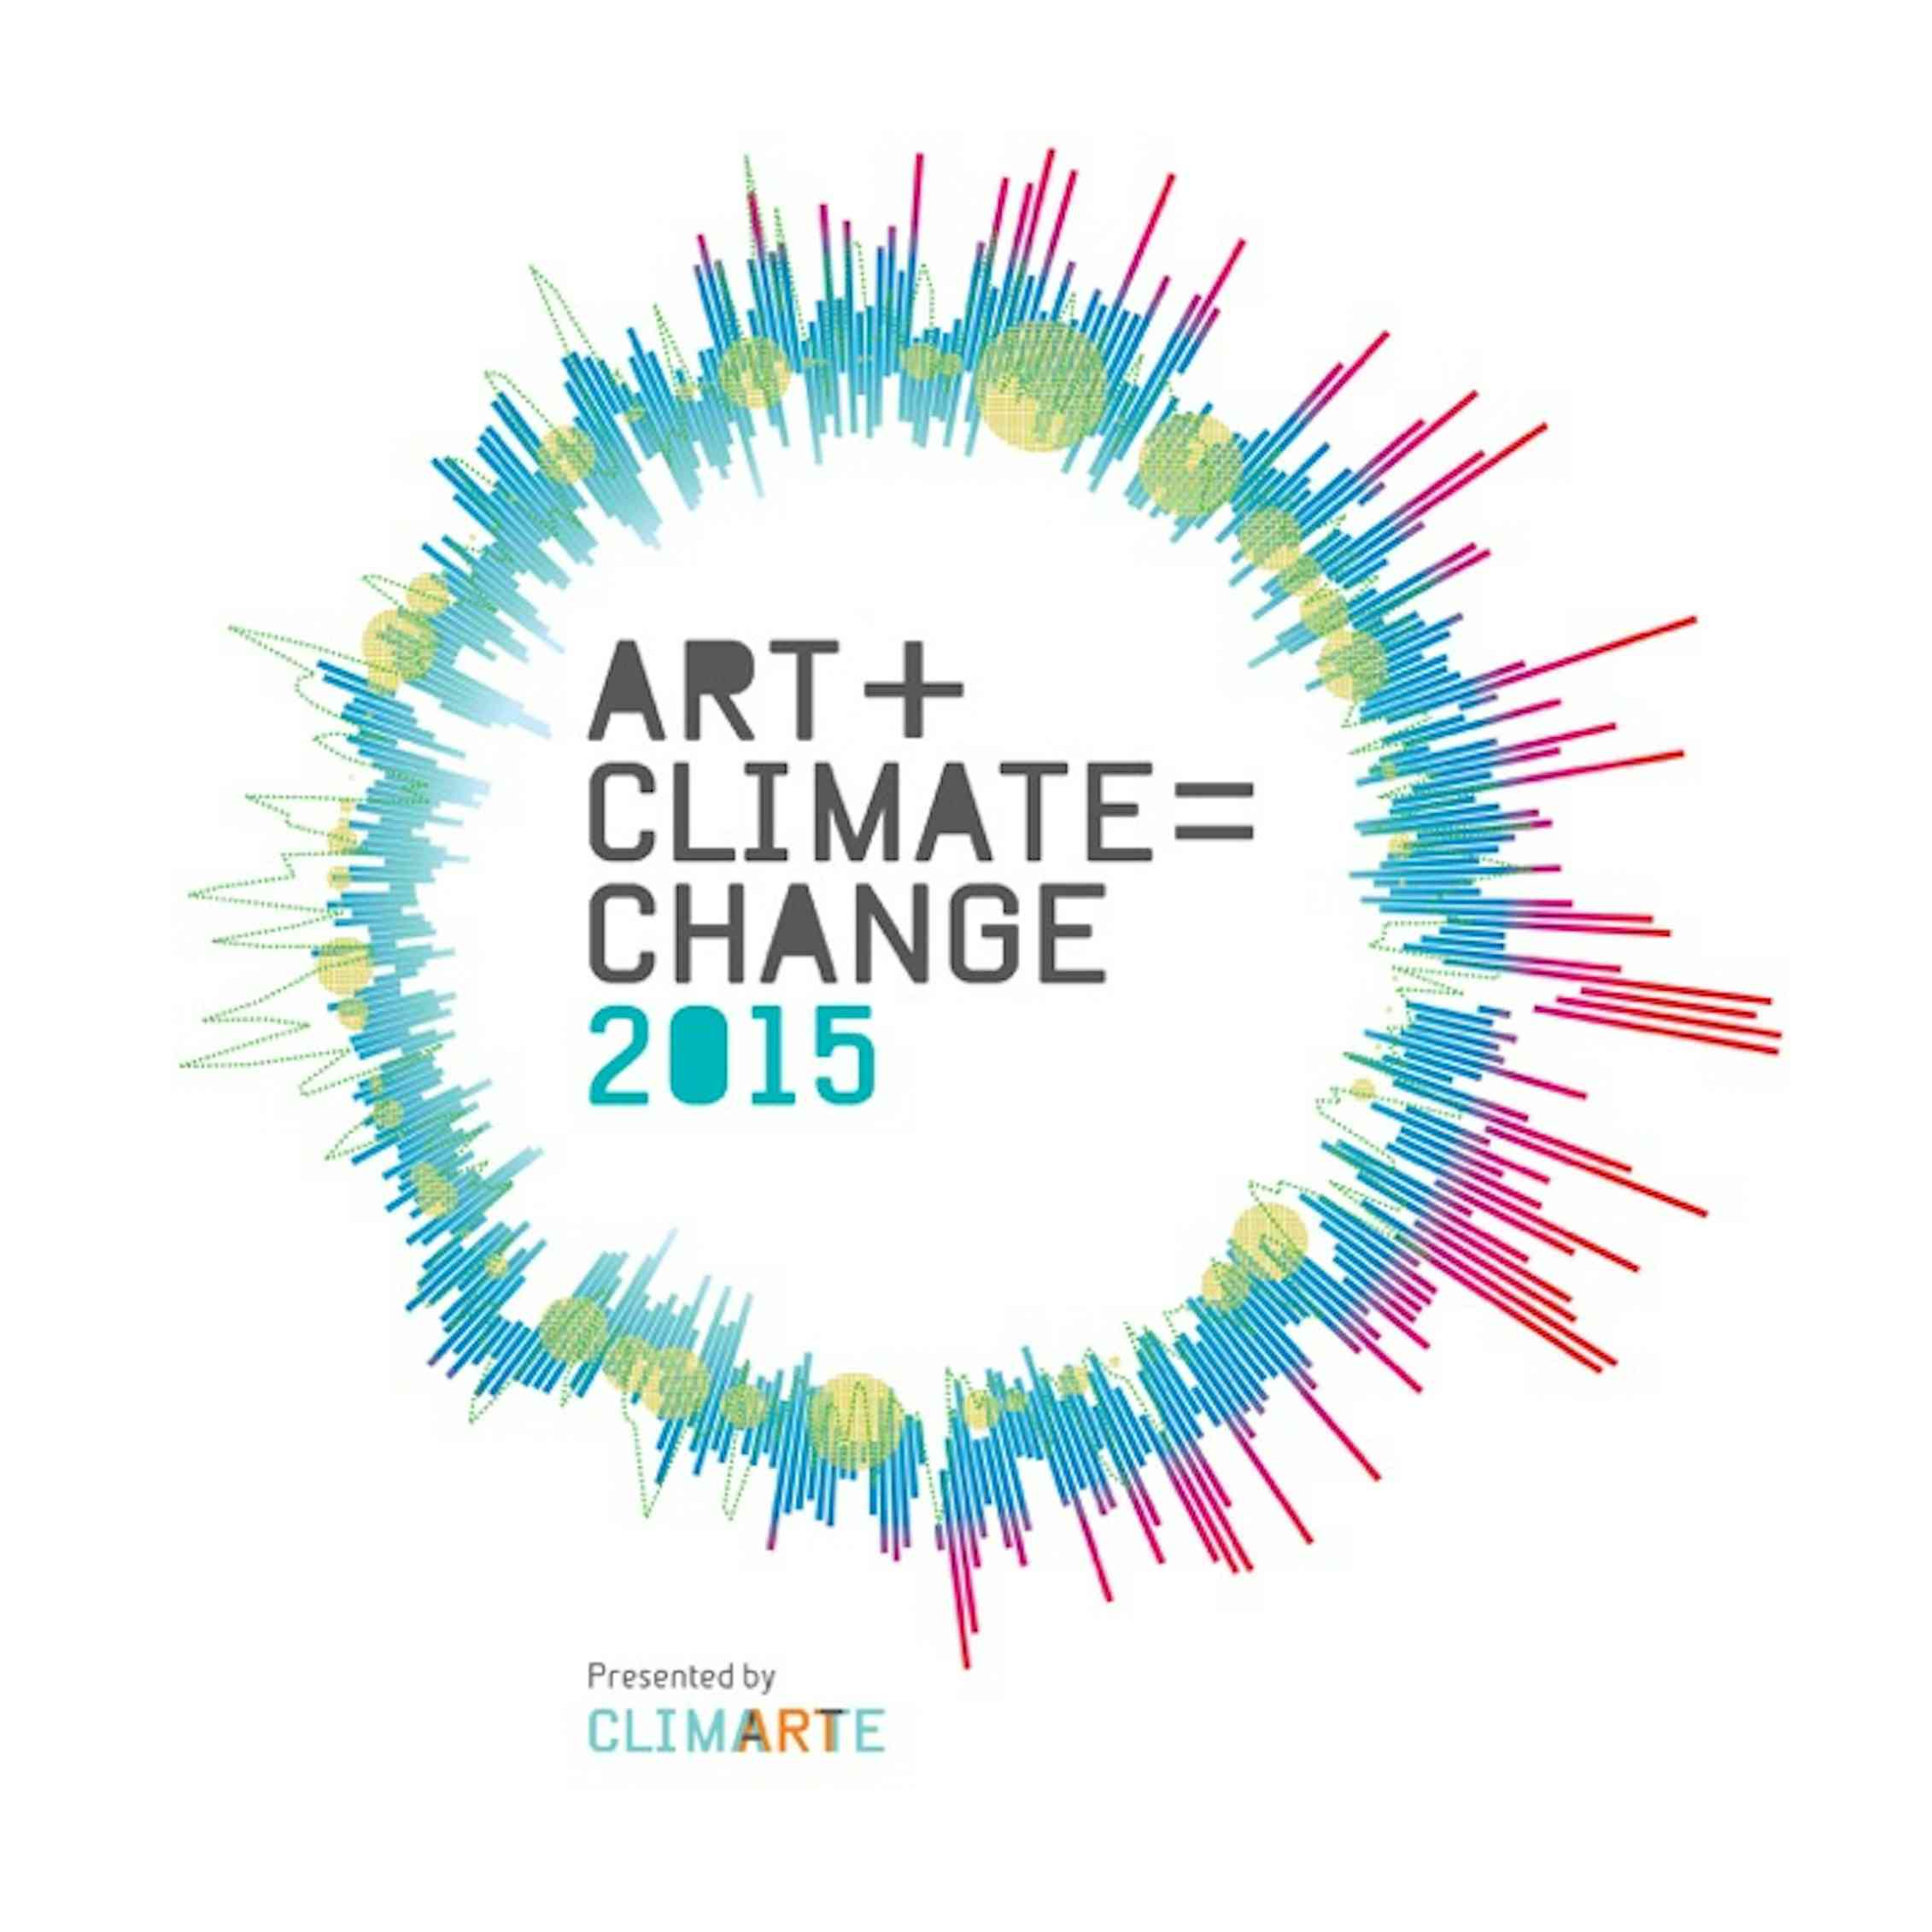 Climate science is looking to art to create change